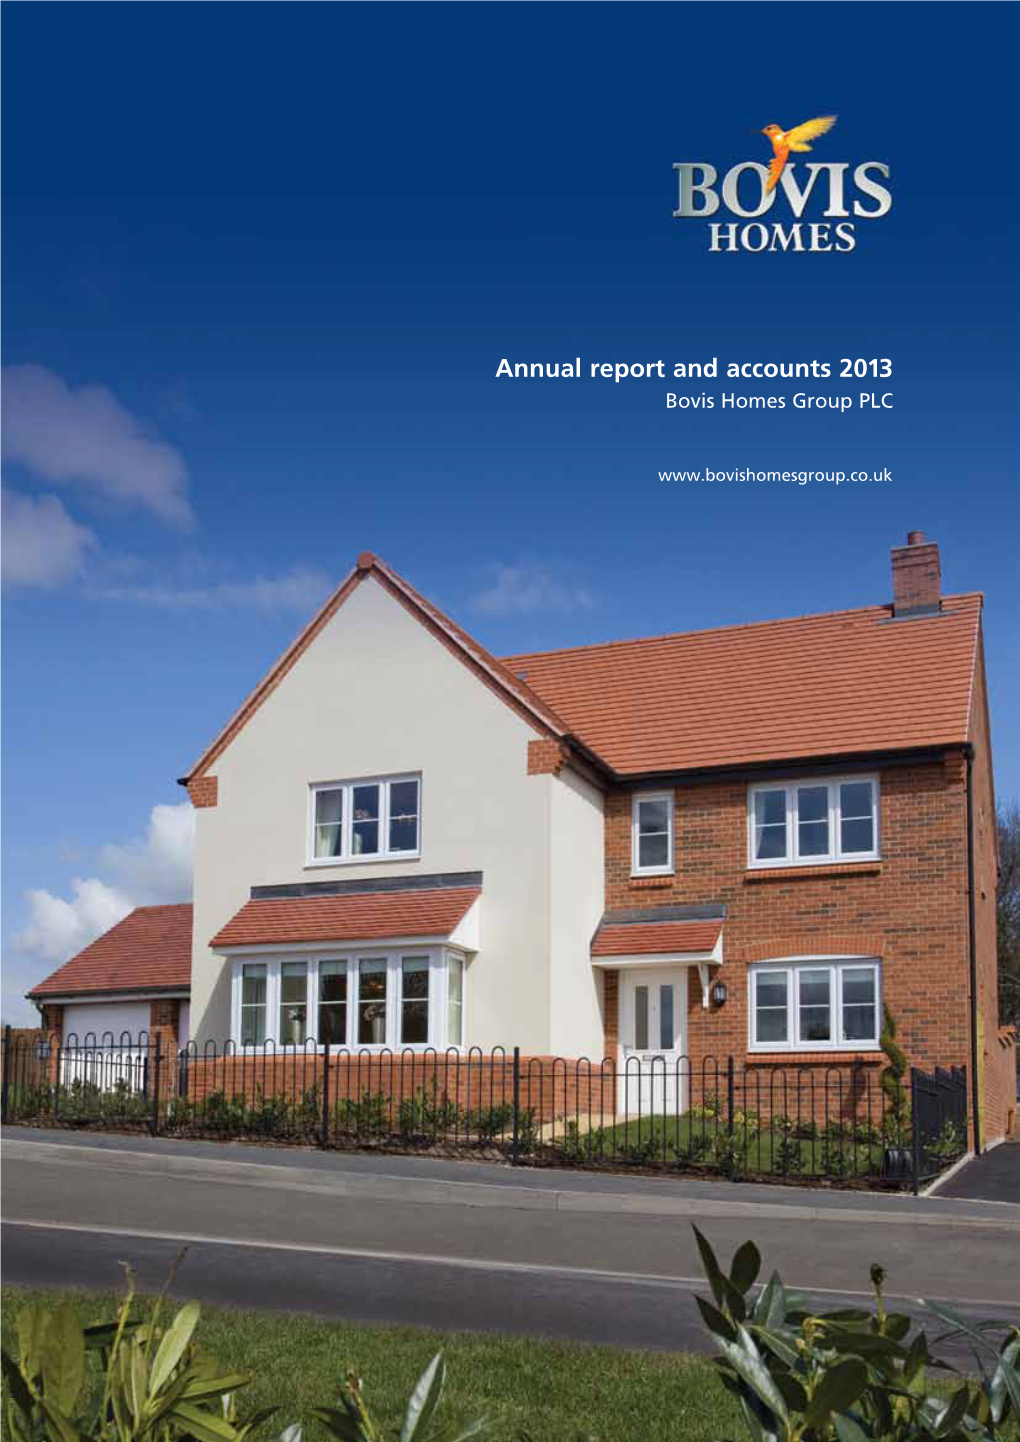 Annual Report and Accounts 2013 Accounts and Report Annual PLC Group Homes Bovis